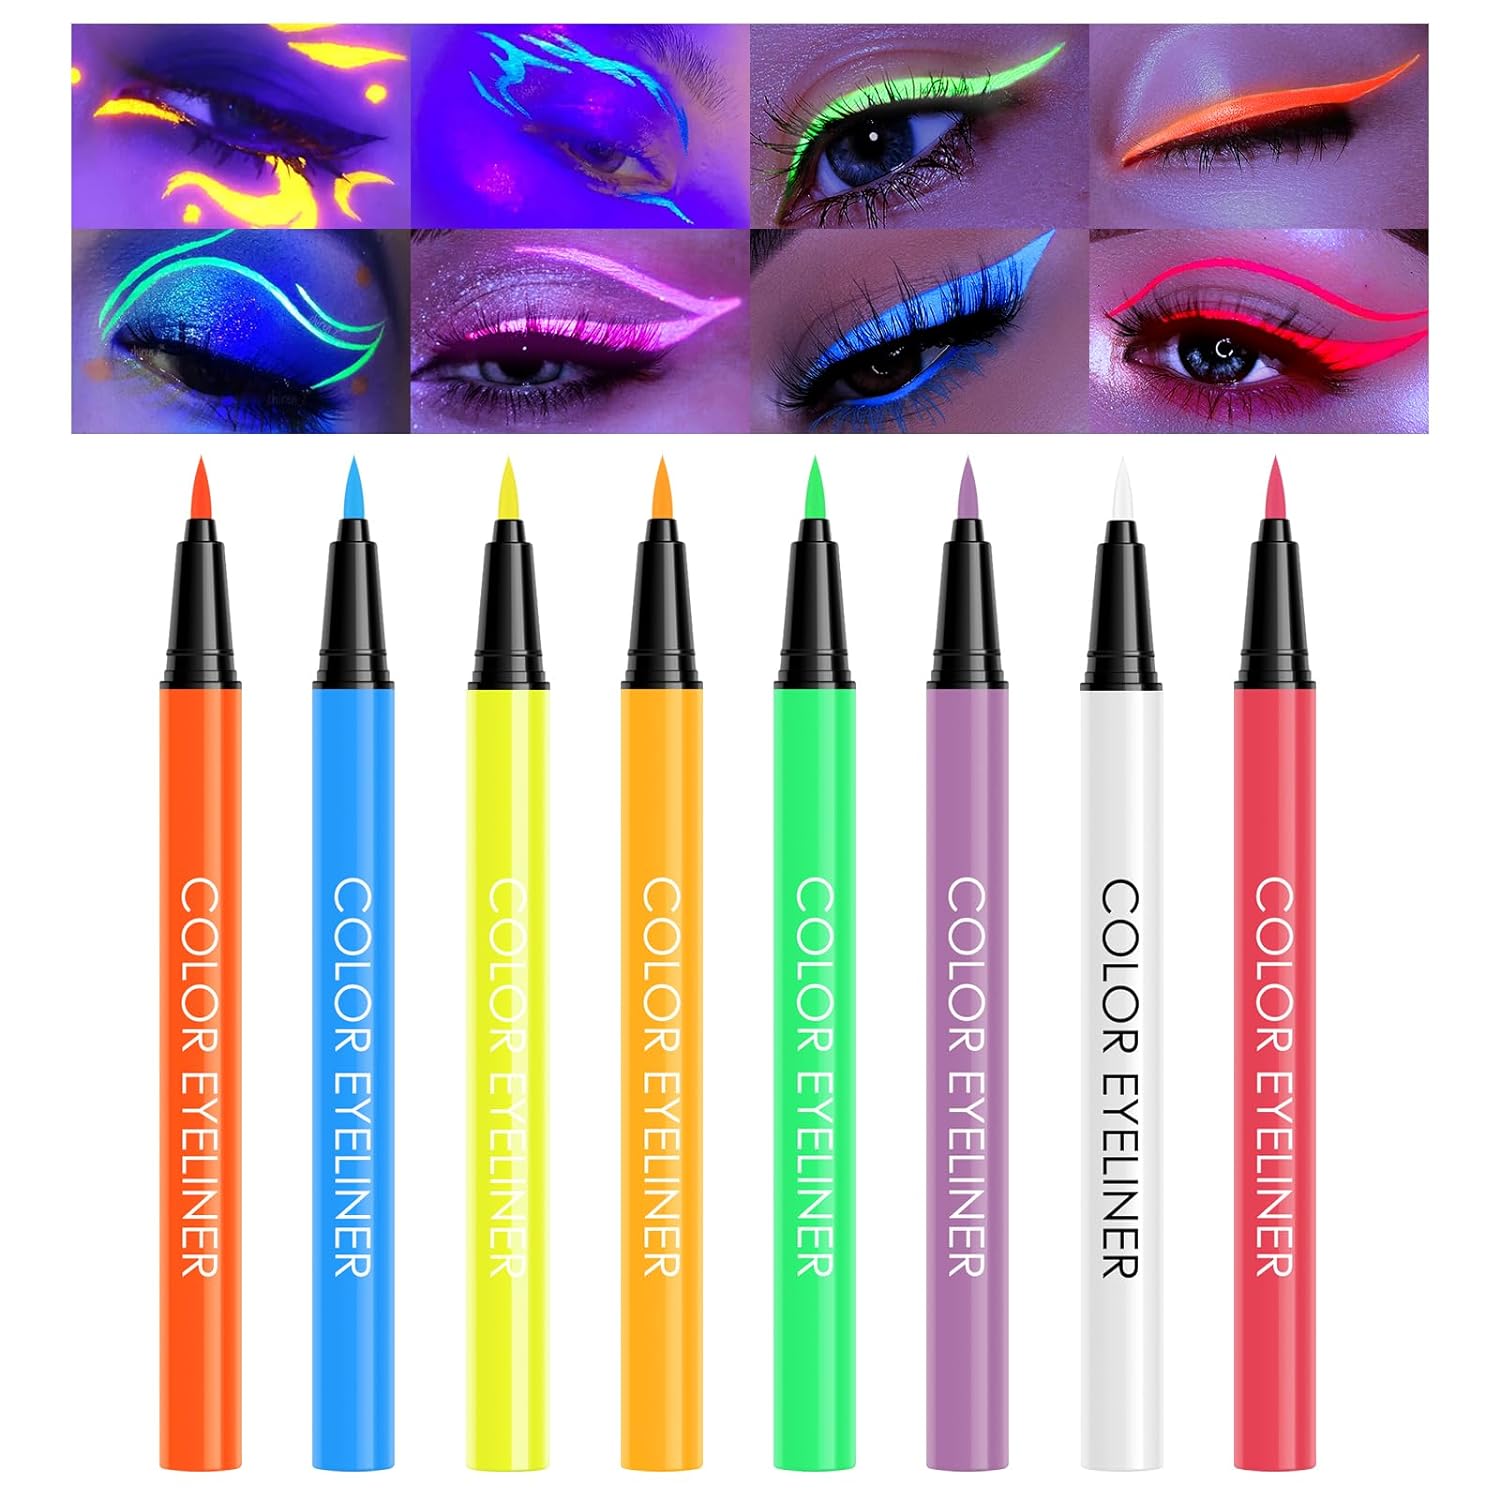 KYDA 8 Colors UV Glow Liquid Eyeliner, Lasting Neon Matte Tint, Glow in the Dark Liner Pen, Quick Dry uorescent Rainbow Eyes Makeup, Under the Blacklight Colorful Eyeliner, by Ownest Beauty